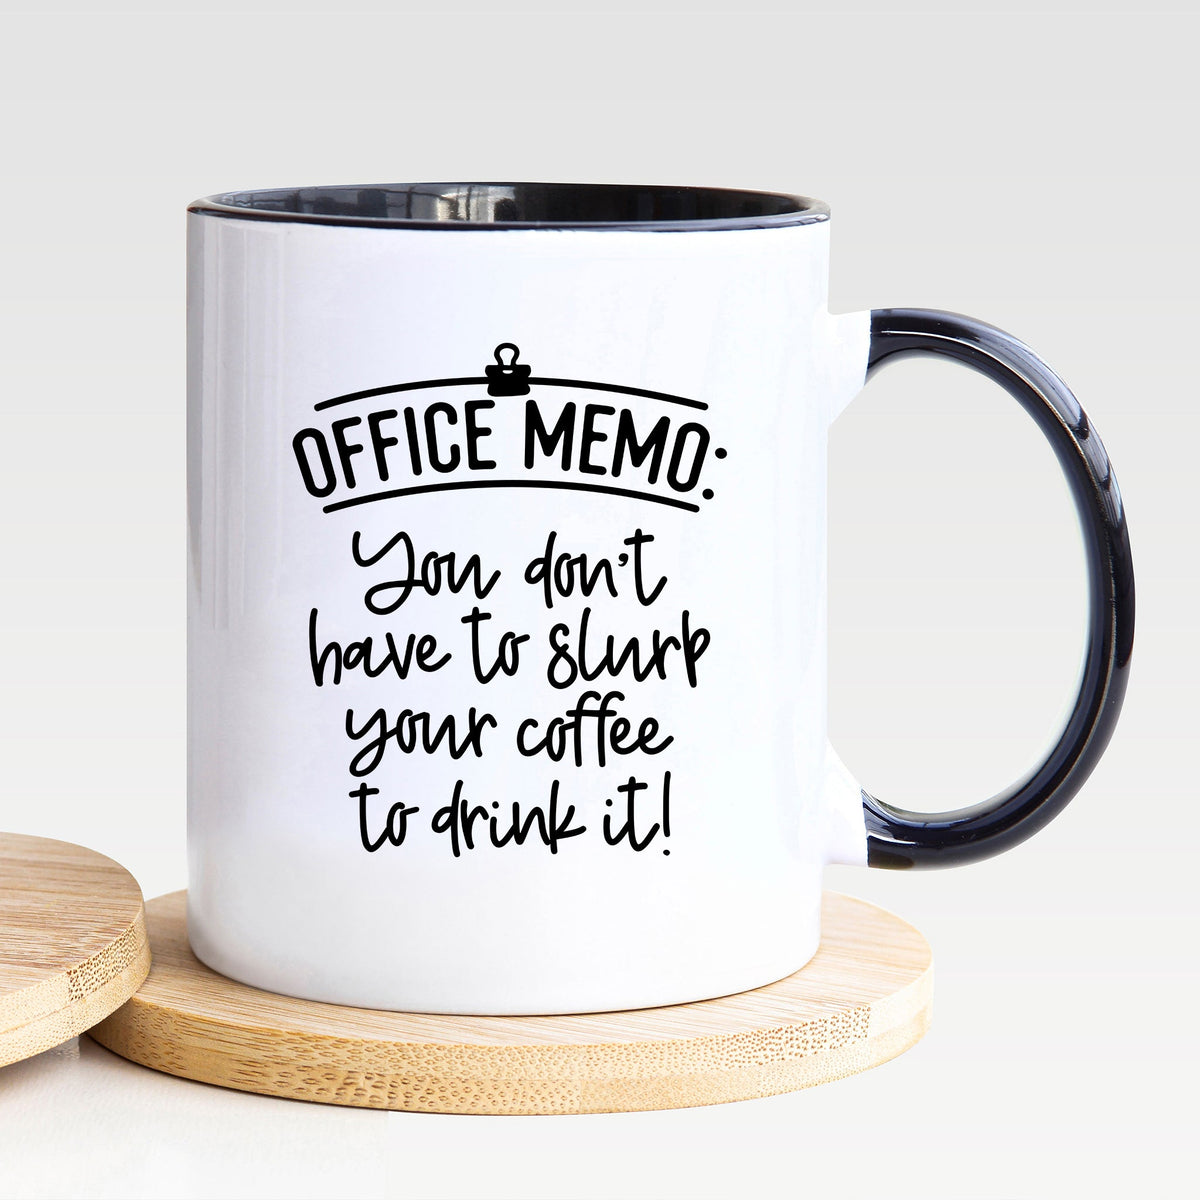 You Don't Have To Slurp Your Coffee To Drink It - Mug